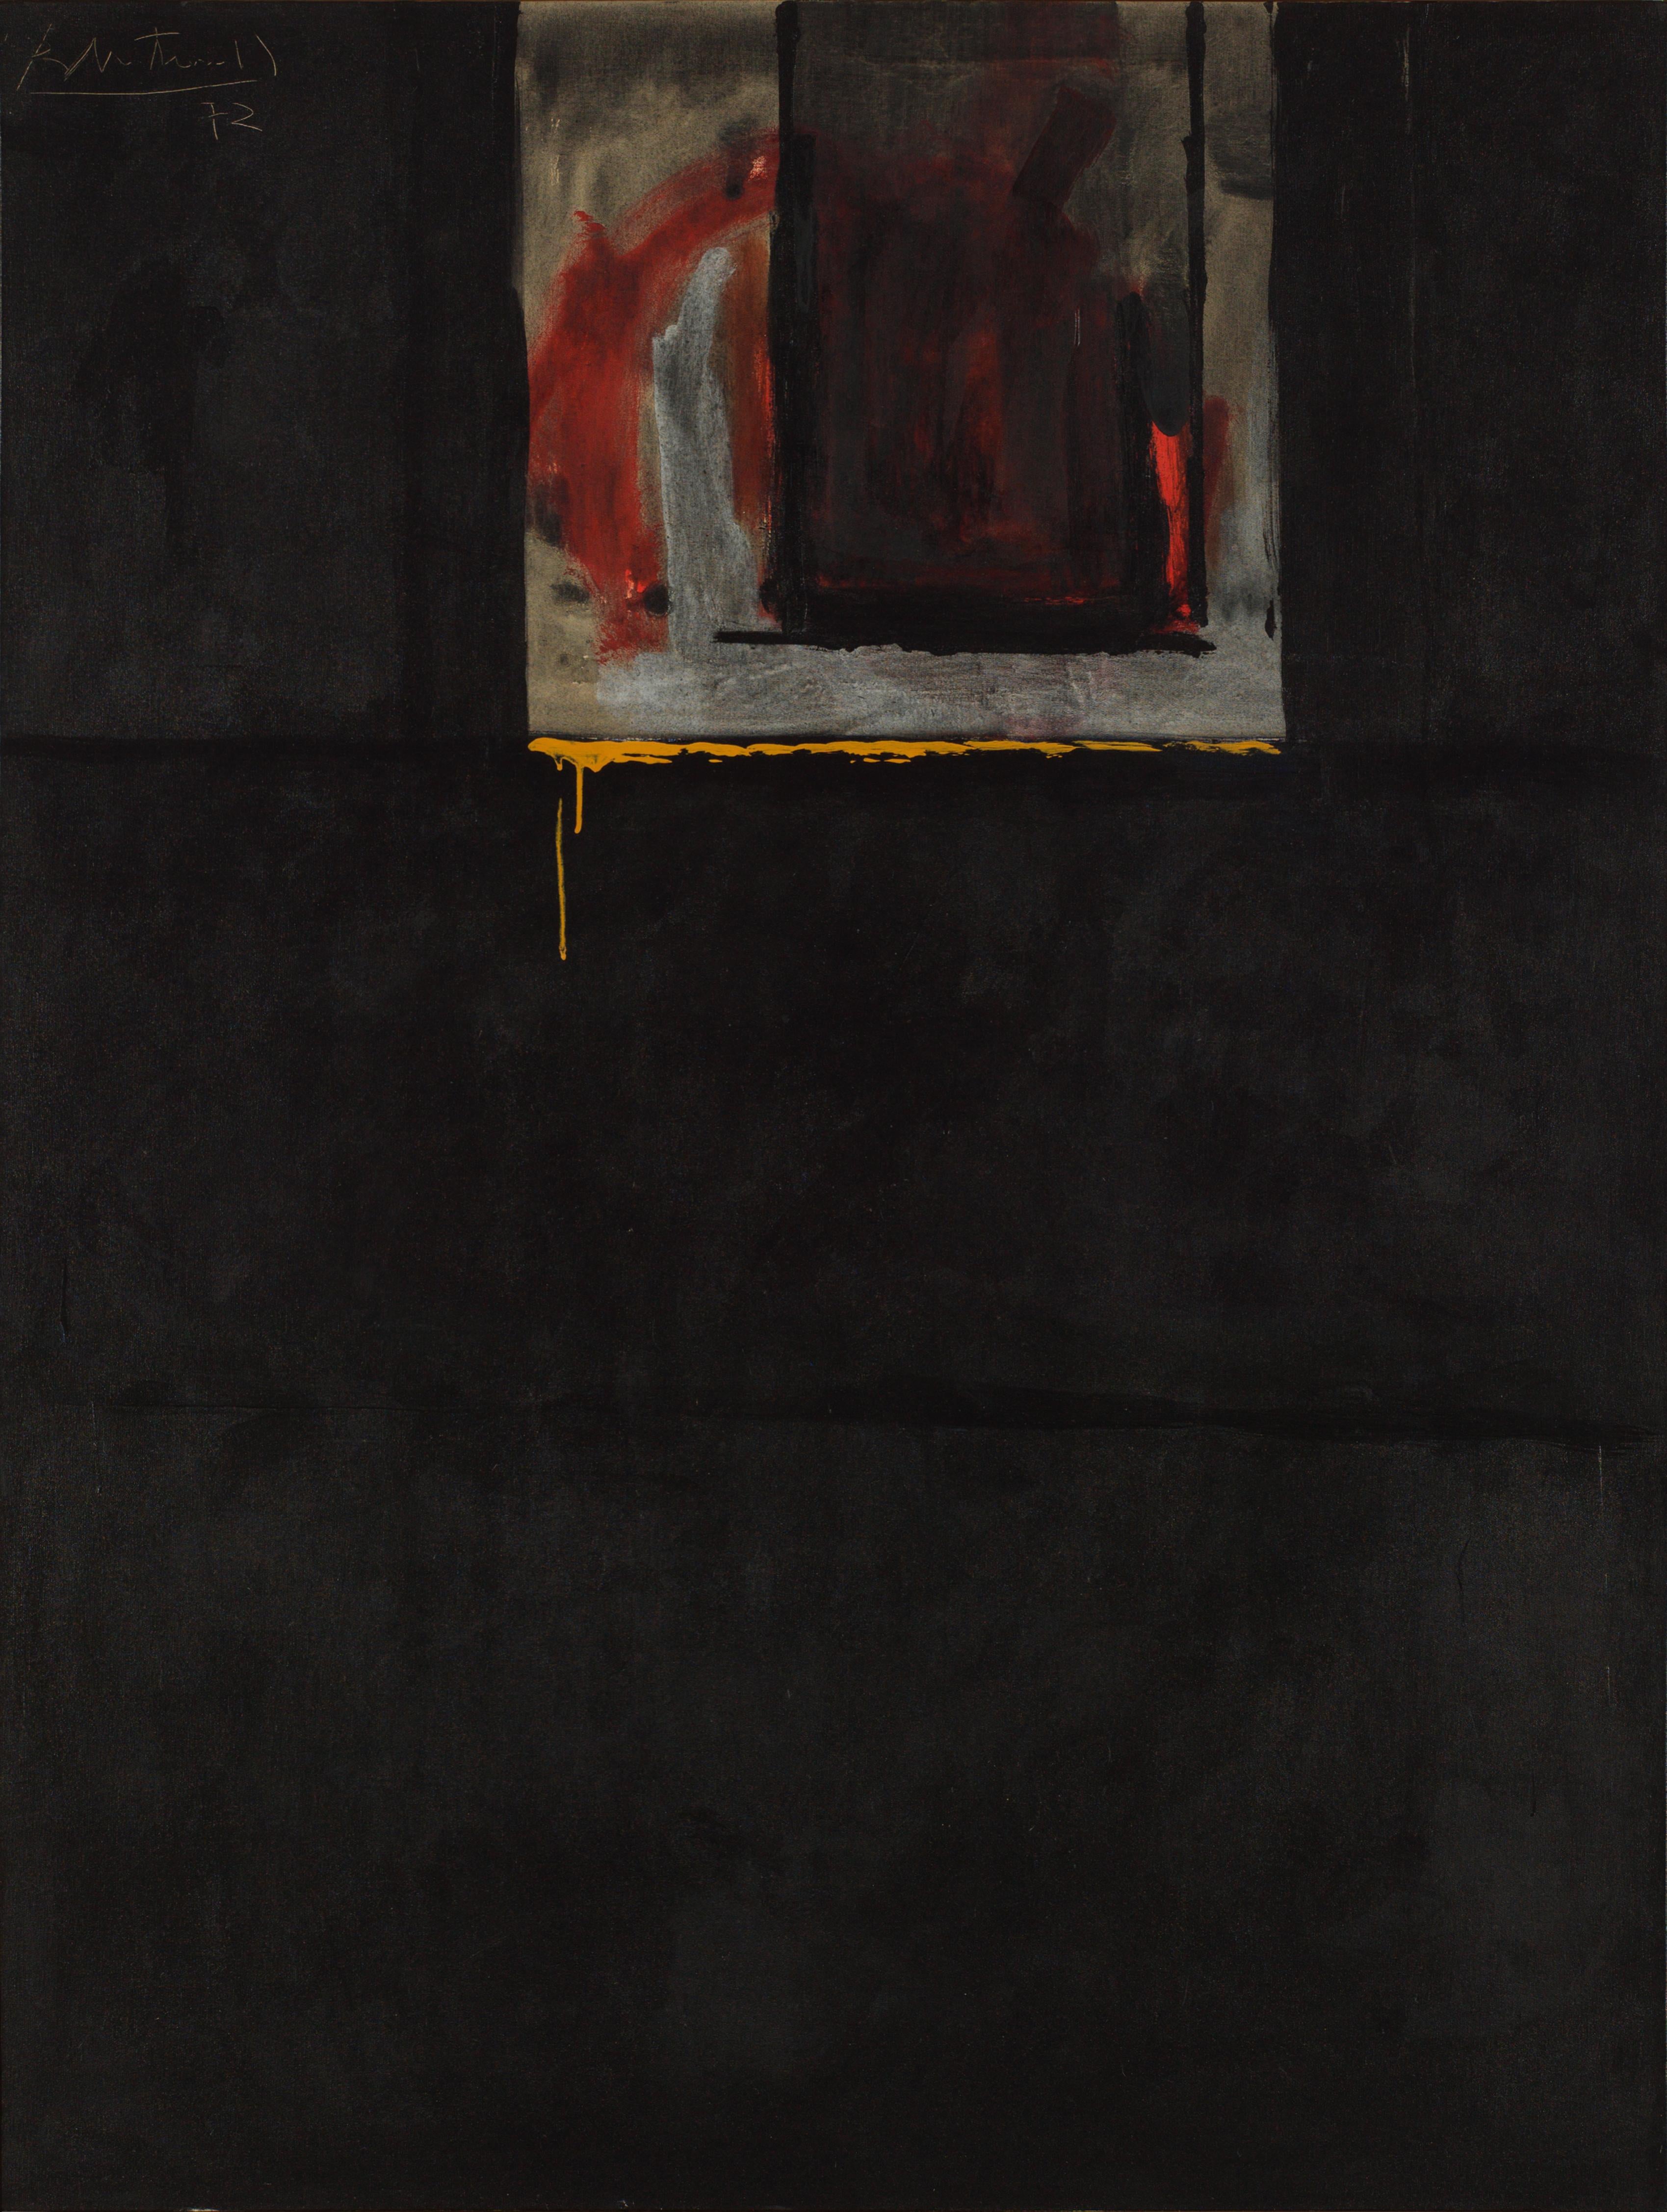 Abstract Painting Robert Motherwell - Dirge royale